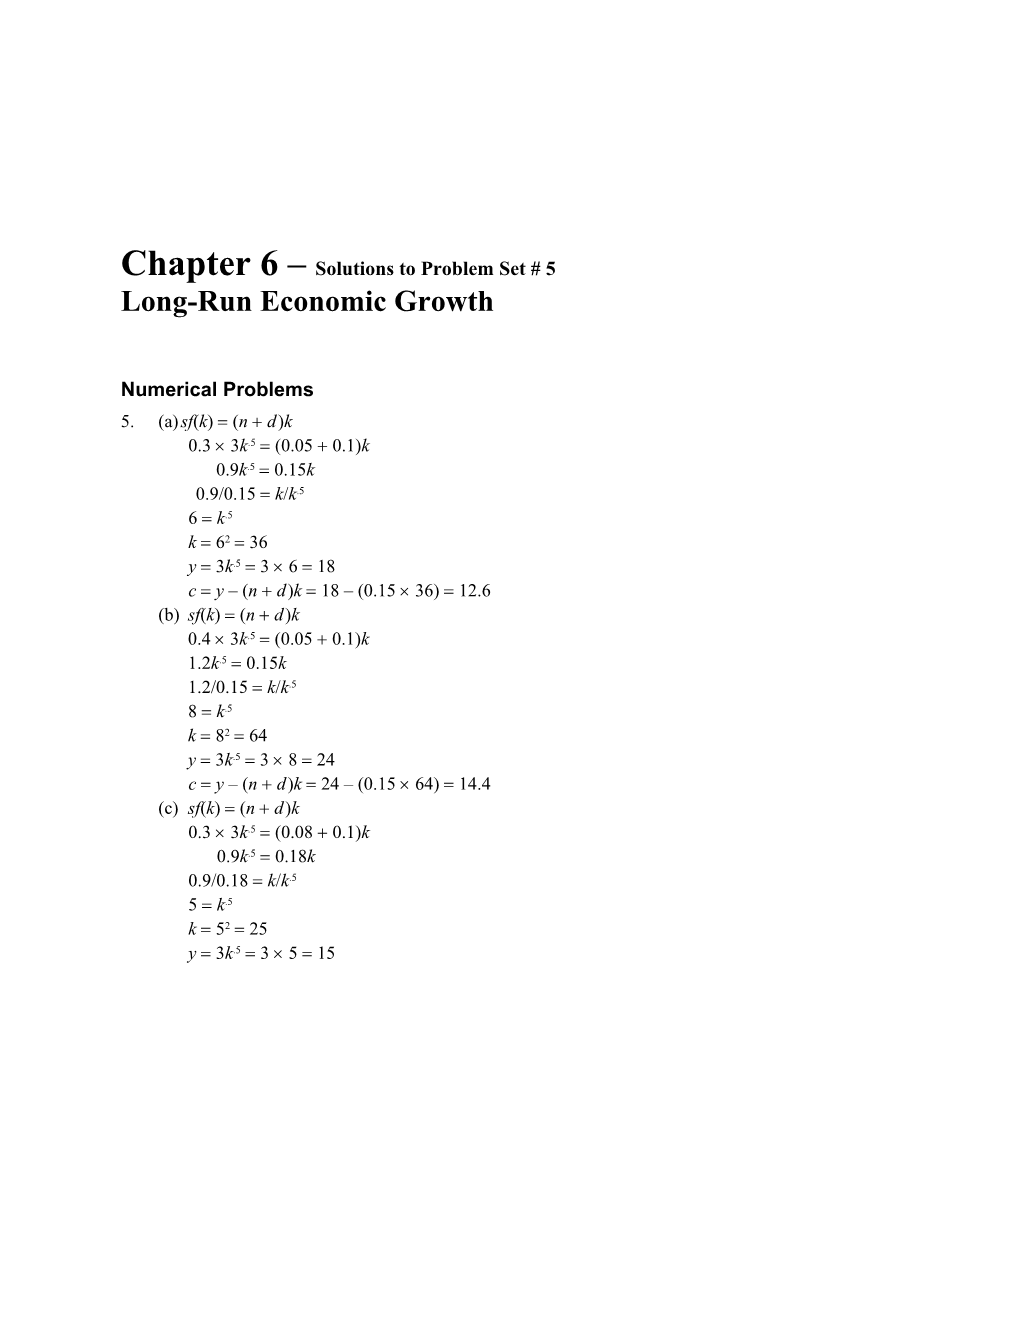 Chapter 6 Solutions to Problem Set # 5 Long-Run Economic Growth